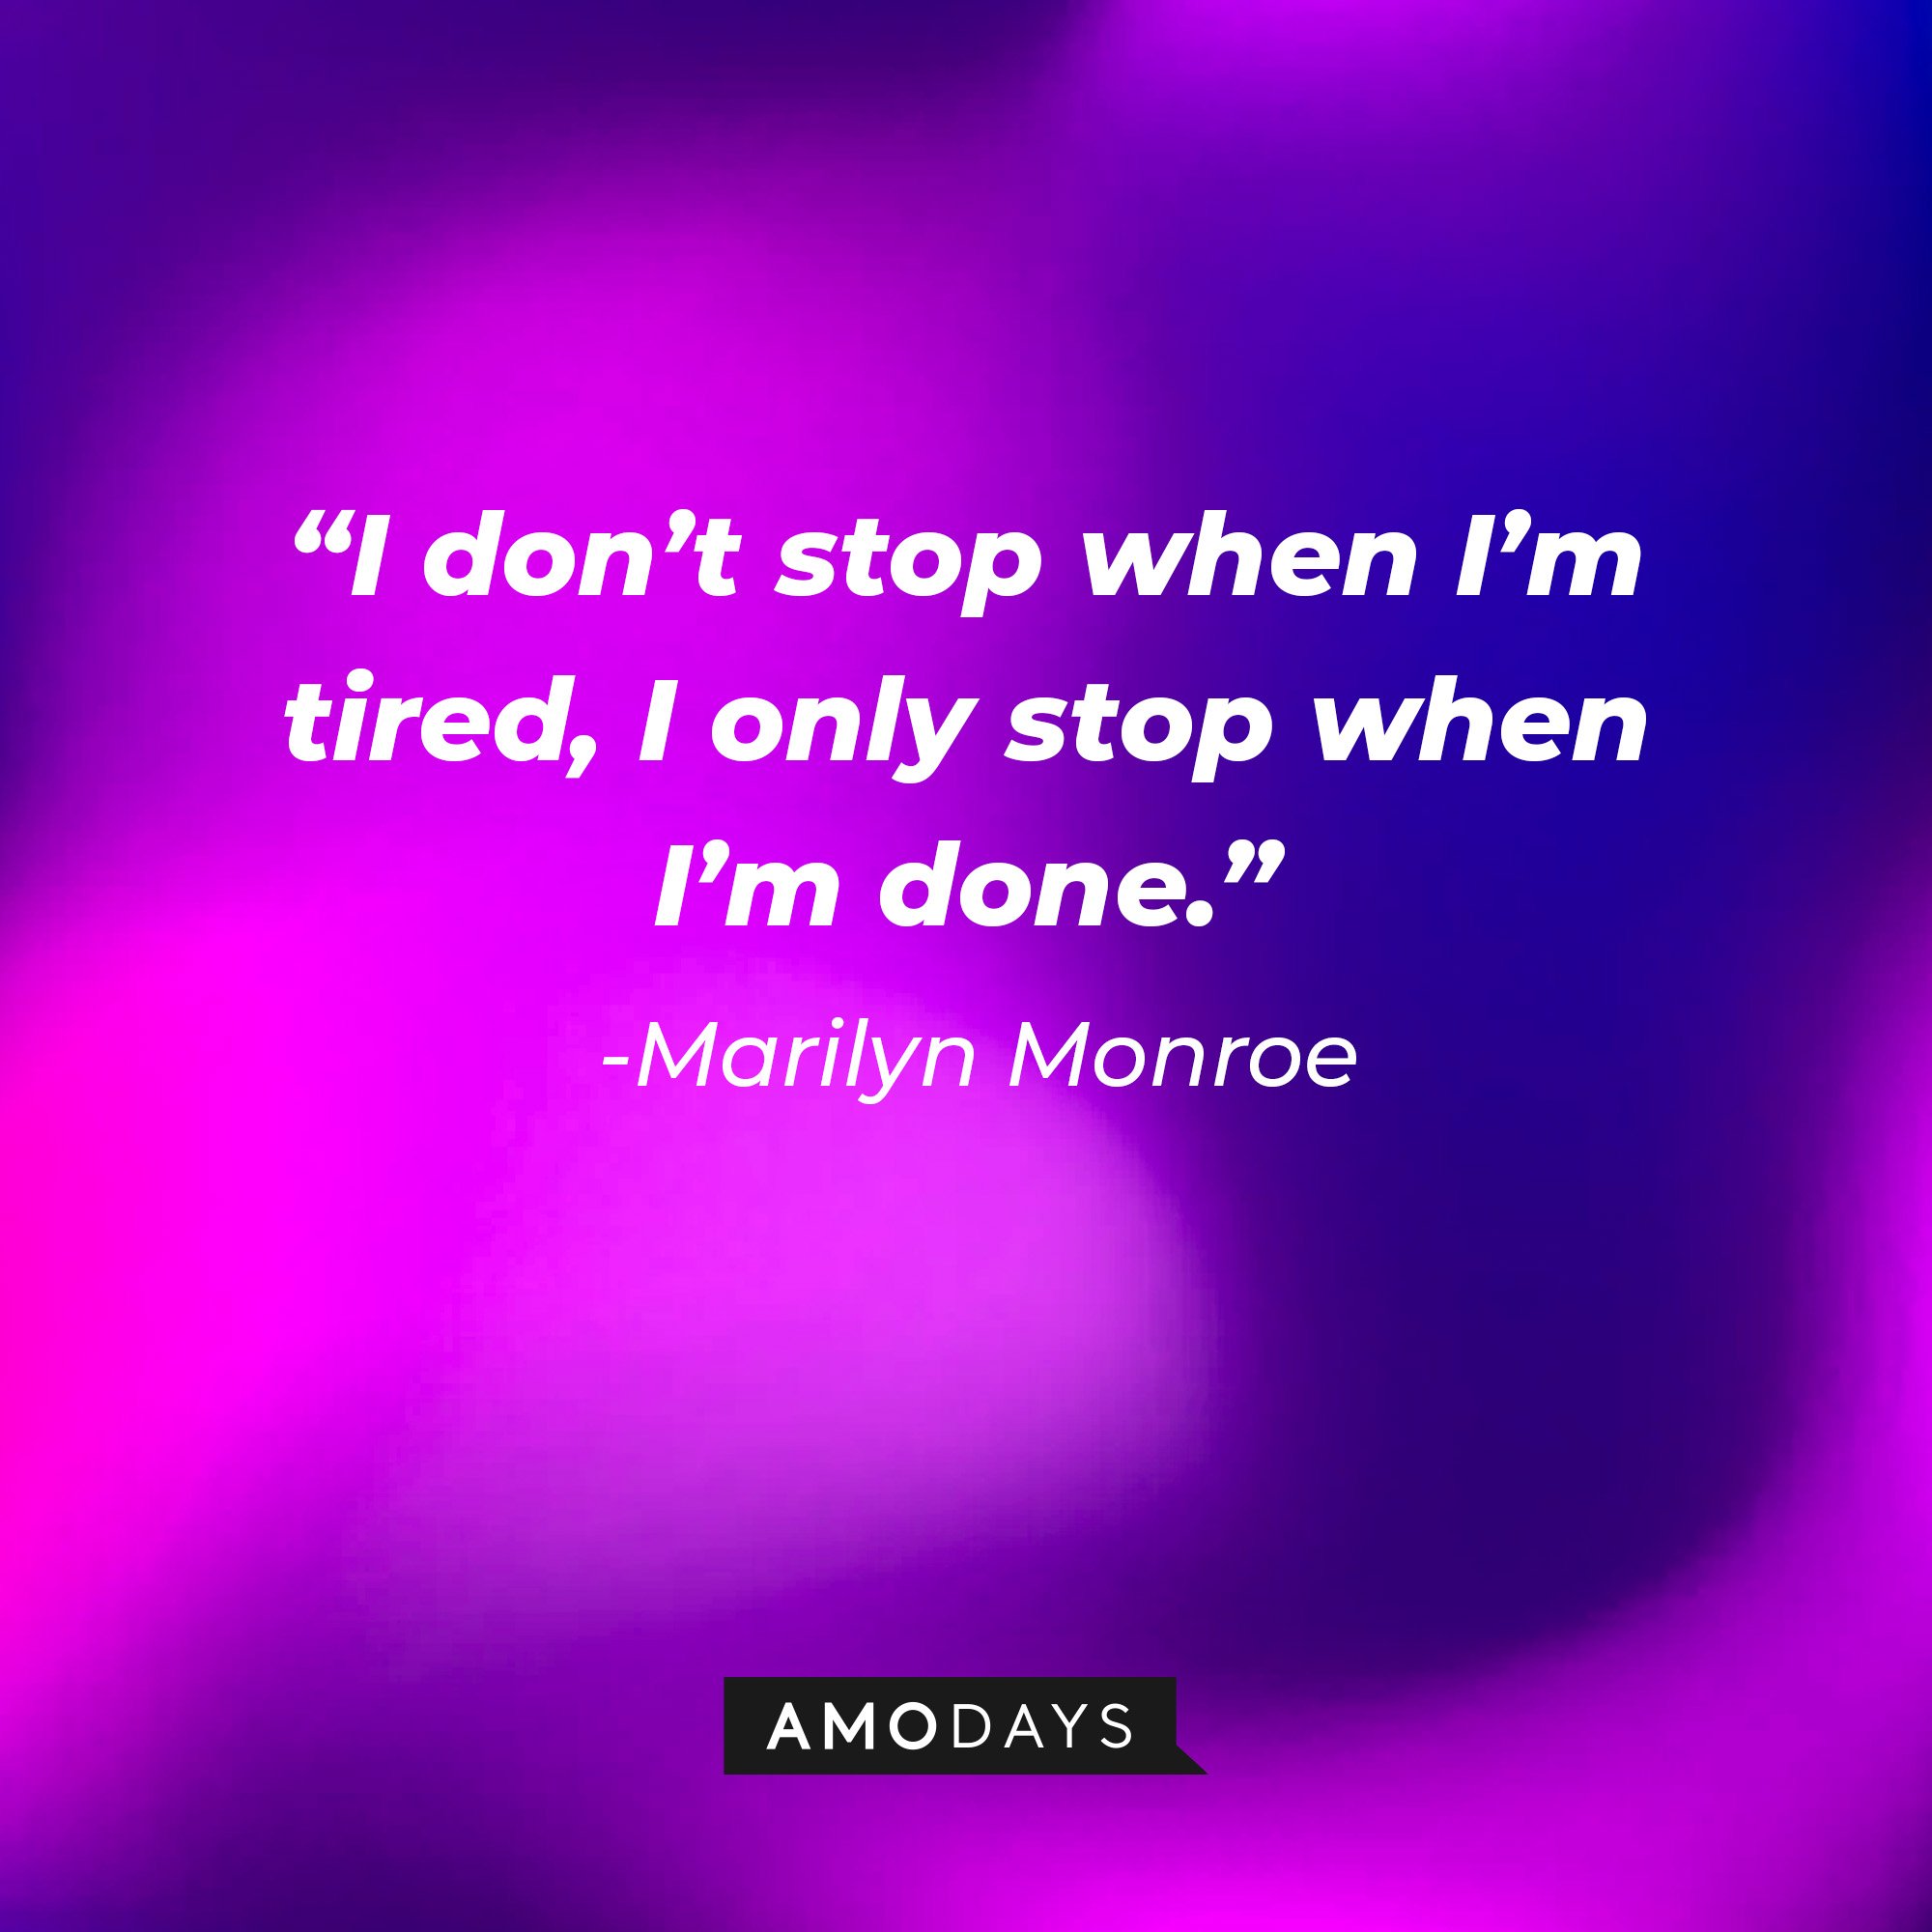  Marilyn Monroe's quote: “I don’t stop when I’m tired, I only stop when I’m done.” | Image: AmoDays